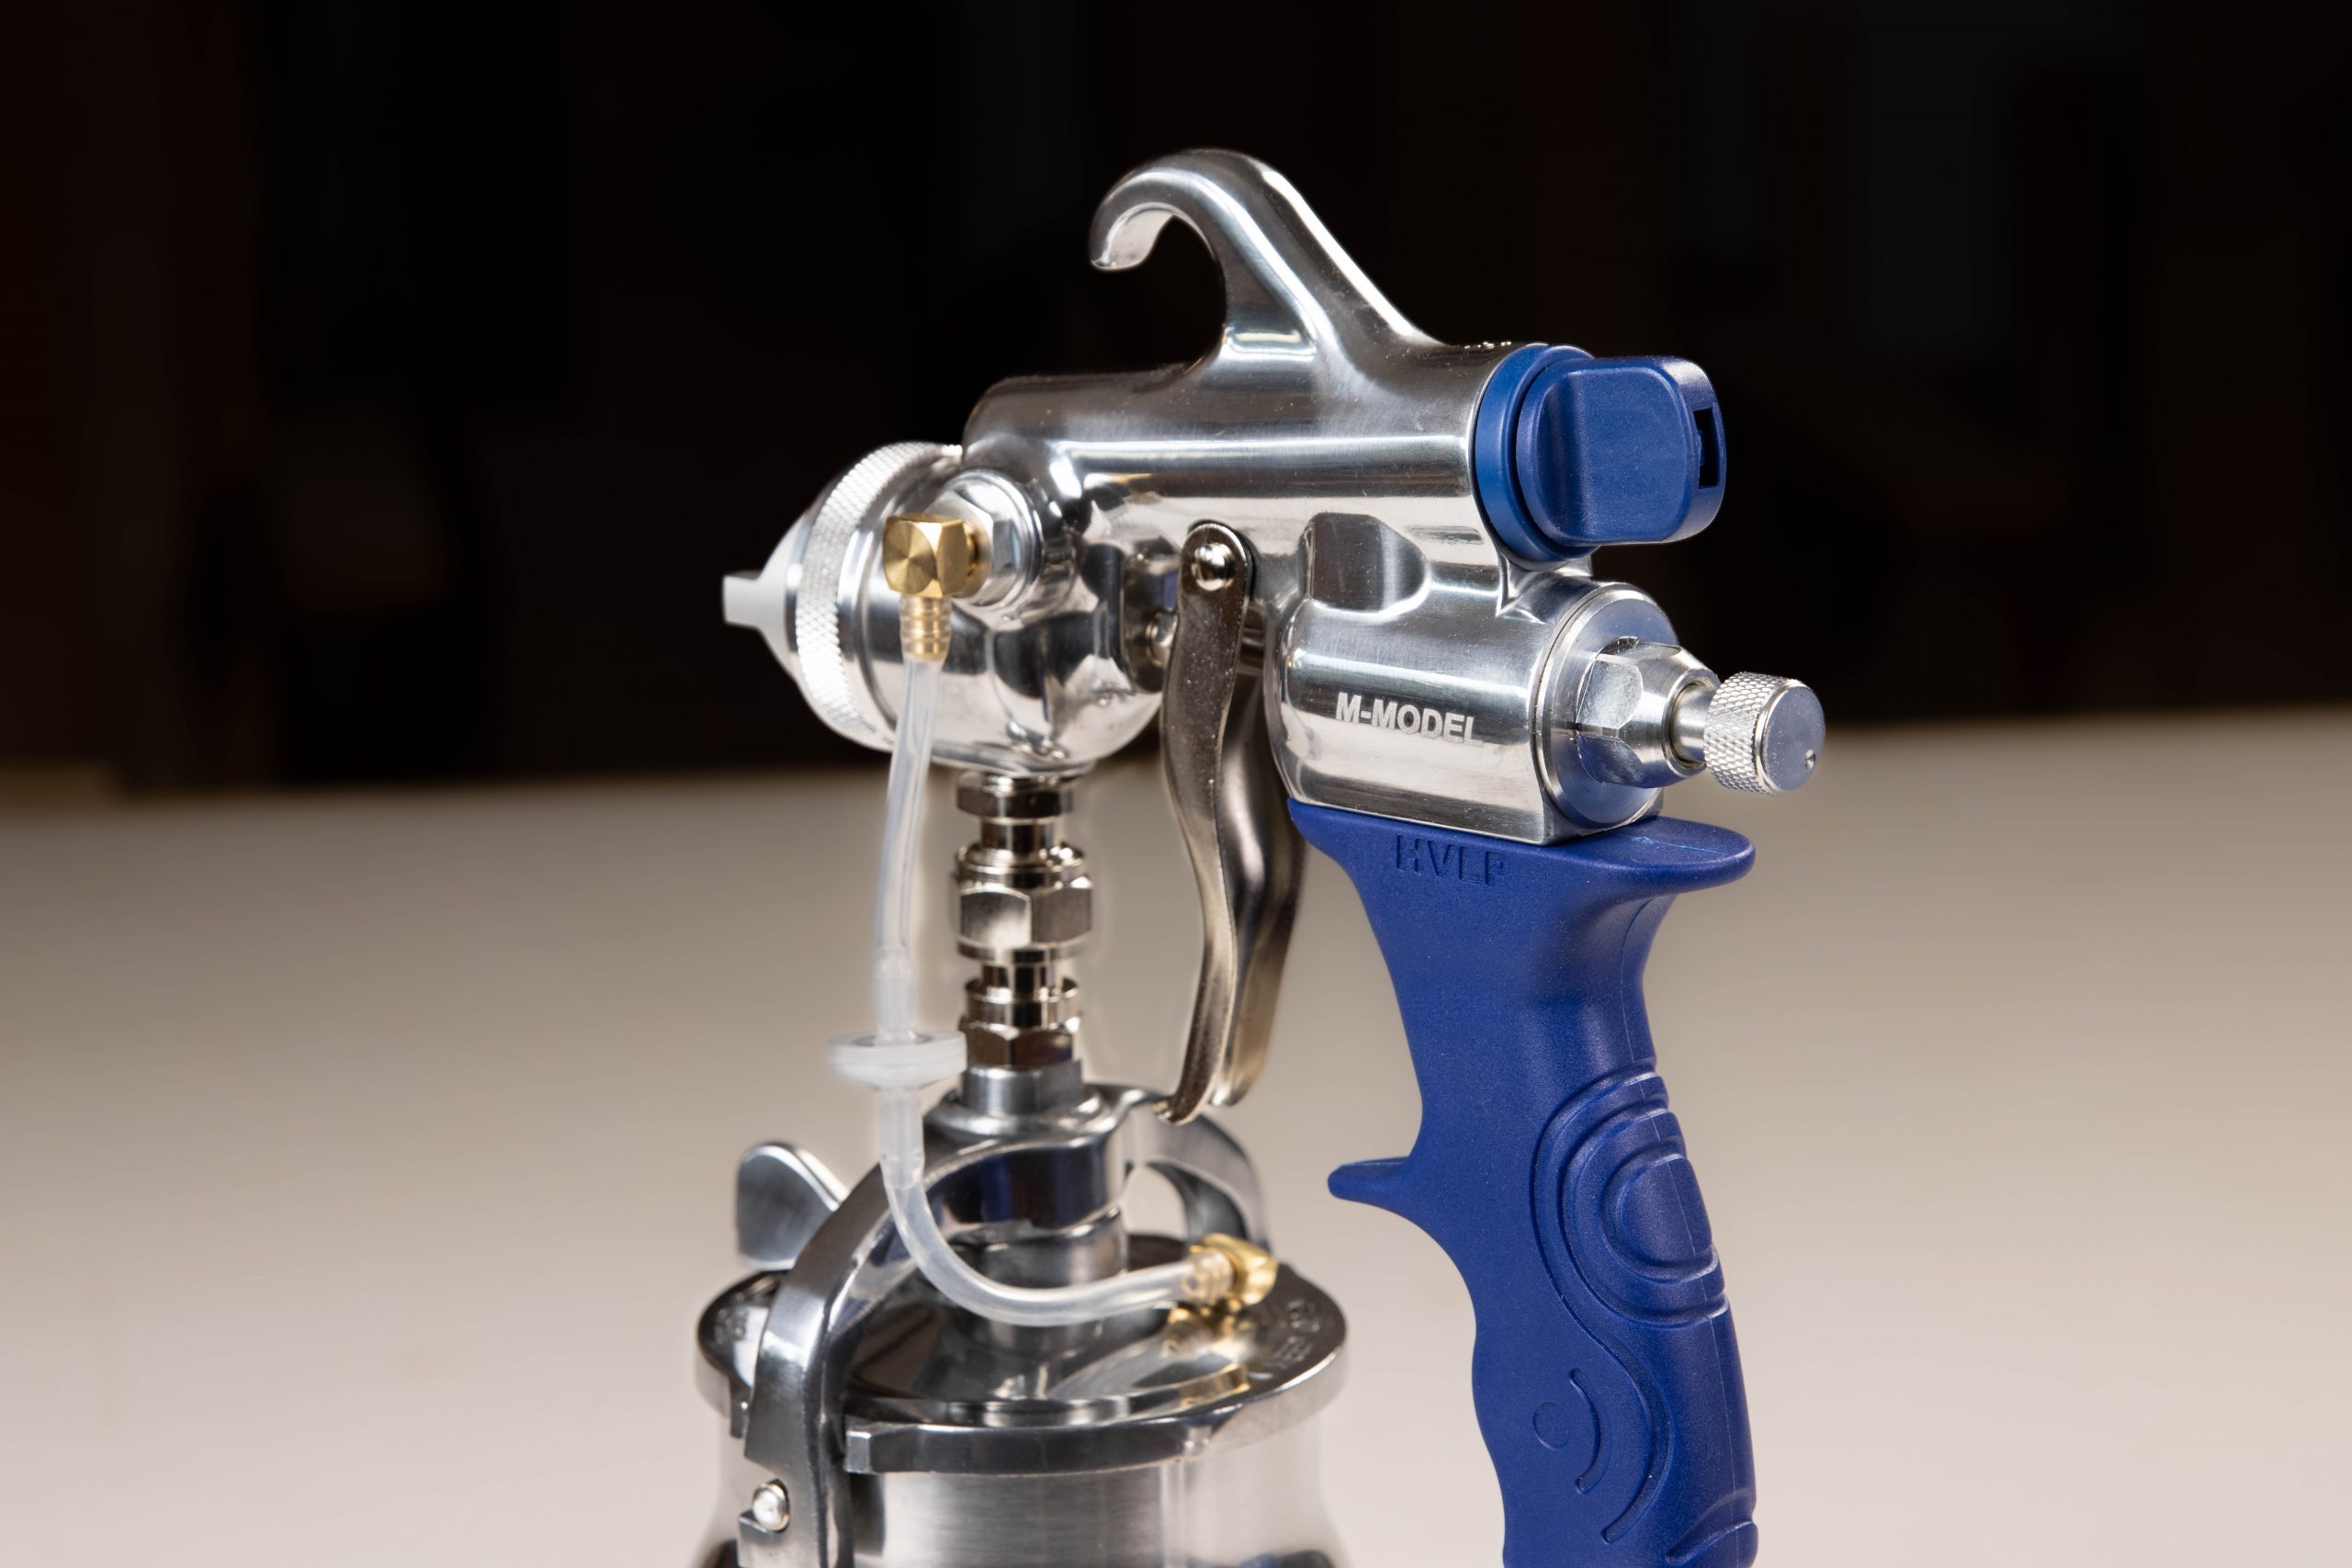 Close up of handle of the M-Model bottom feed spray gun.